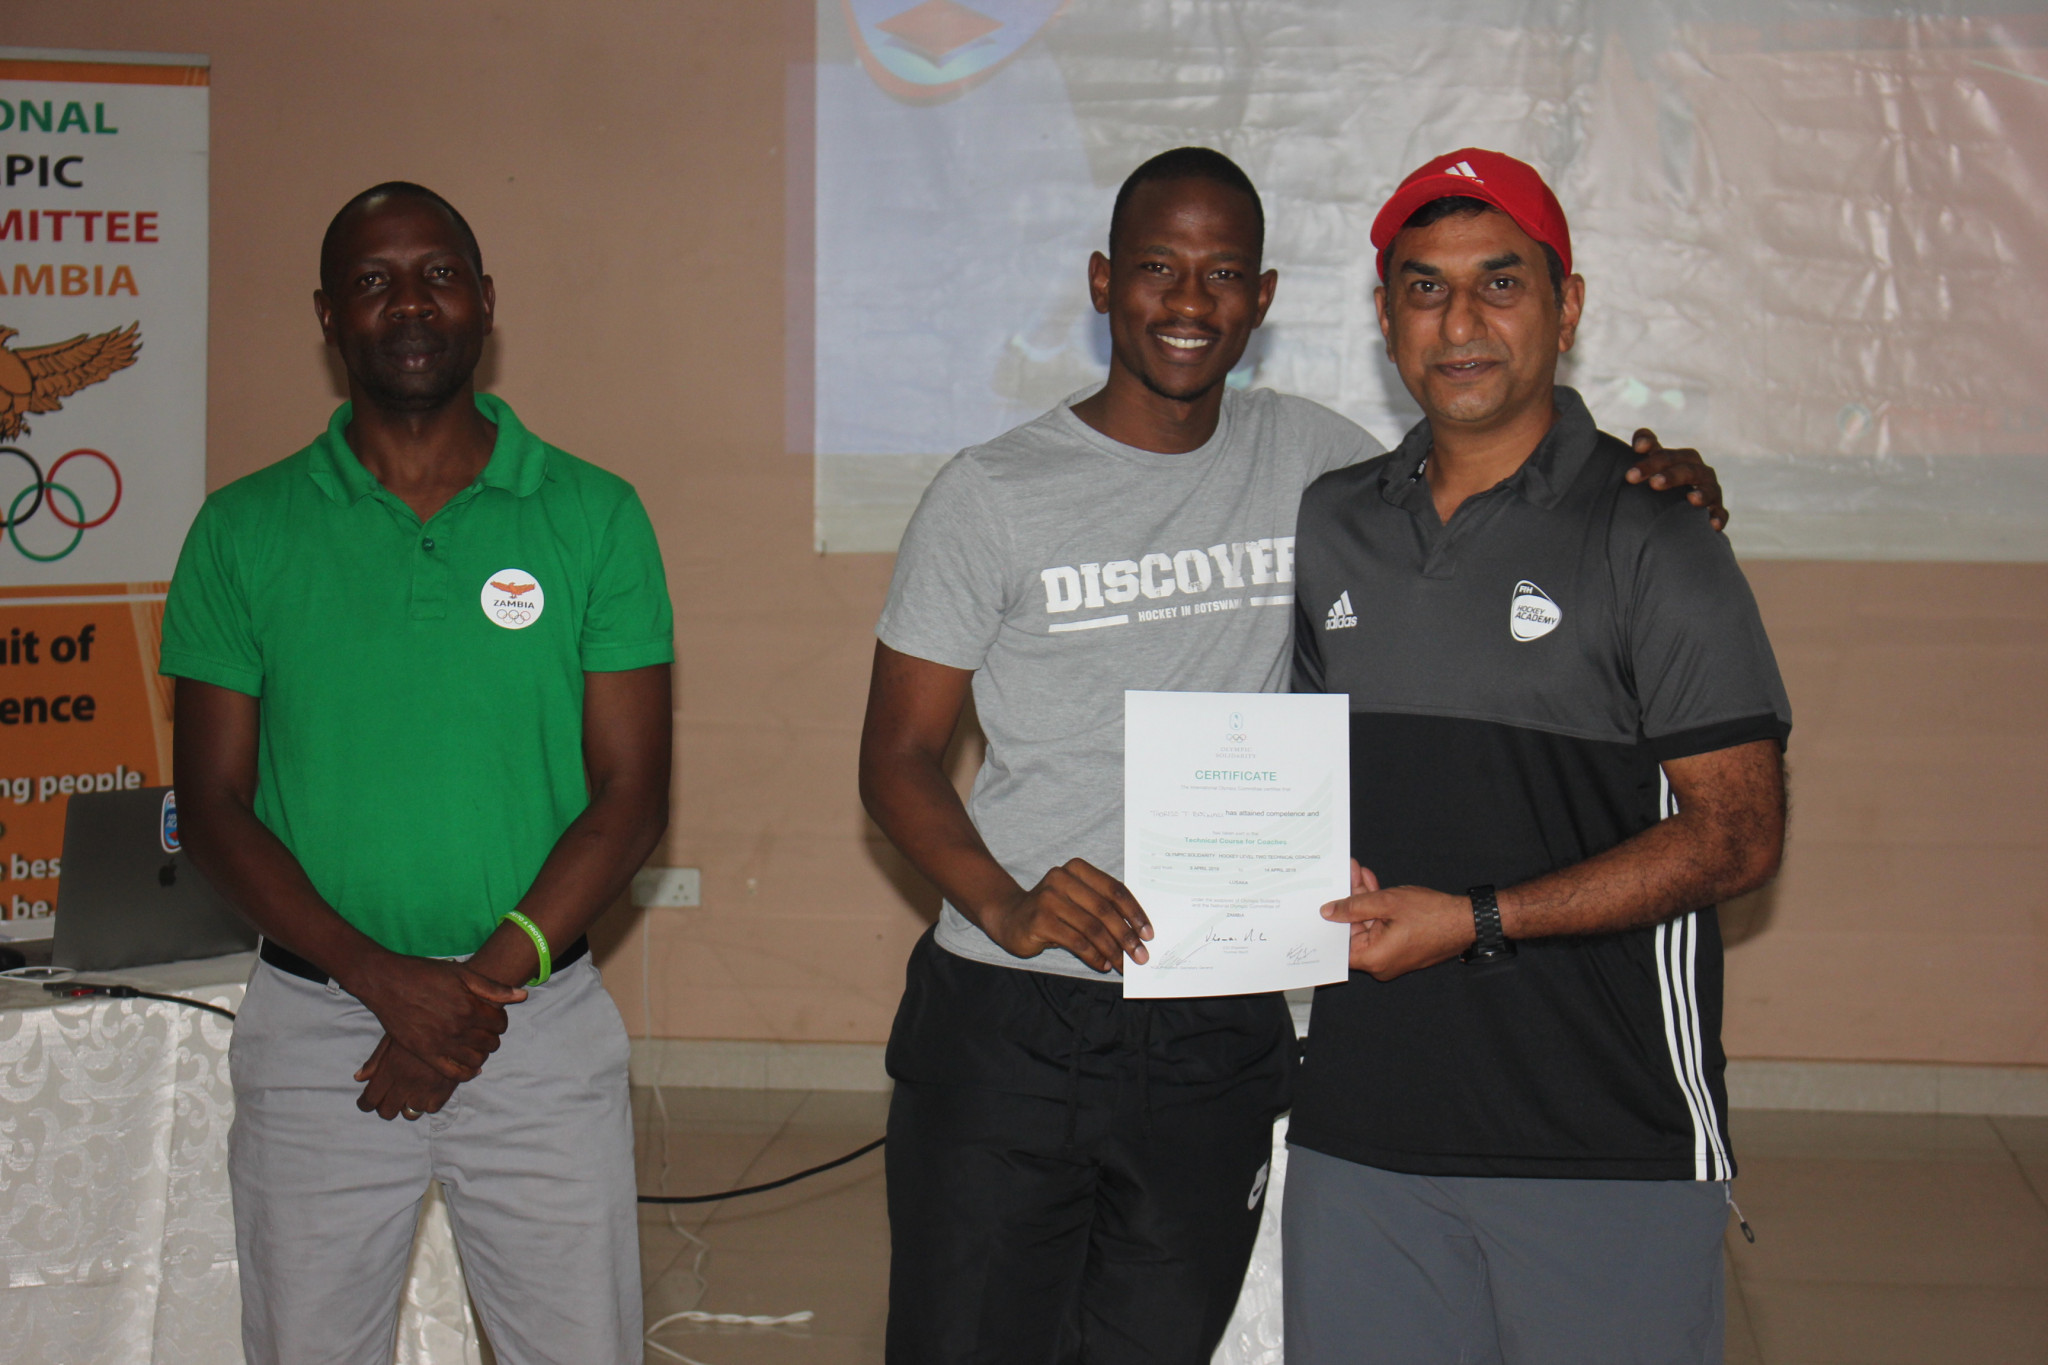 Participants received Olympic Solidarity certificates ©NOCZ